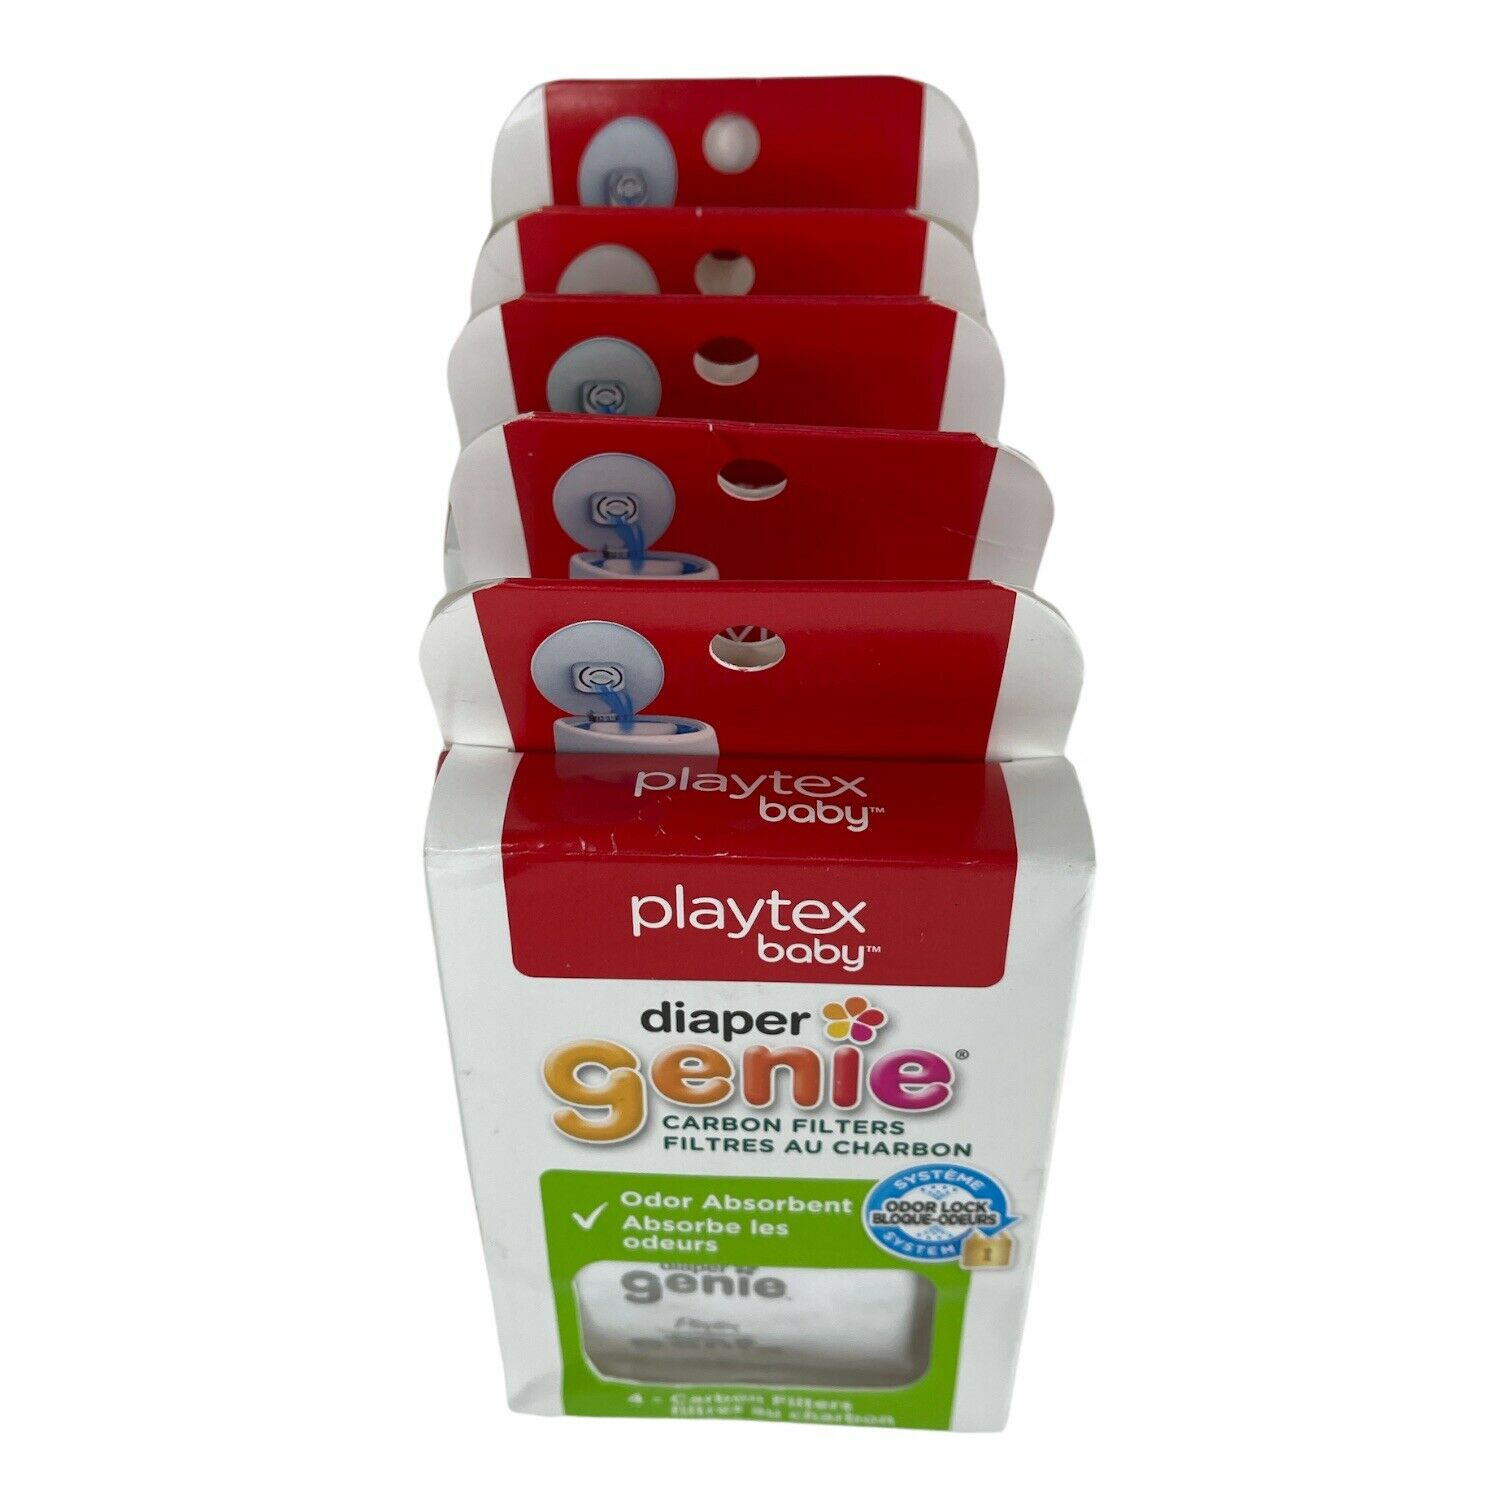 Playtex Carbon Filter Refill For Diaper Genie 4 Filters Per Box (5 Boxes = 20)